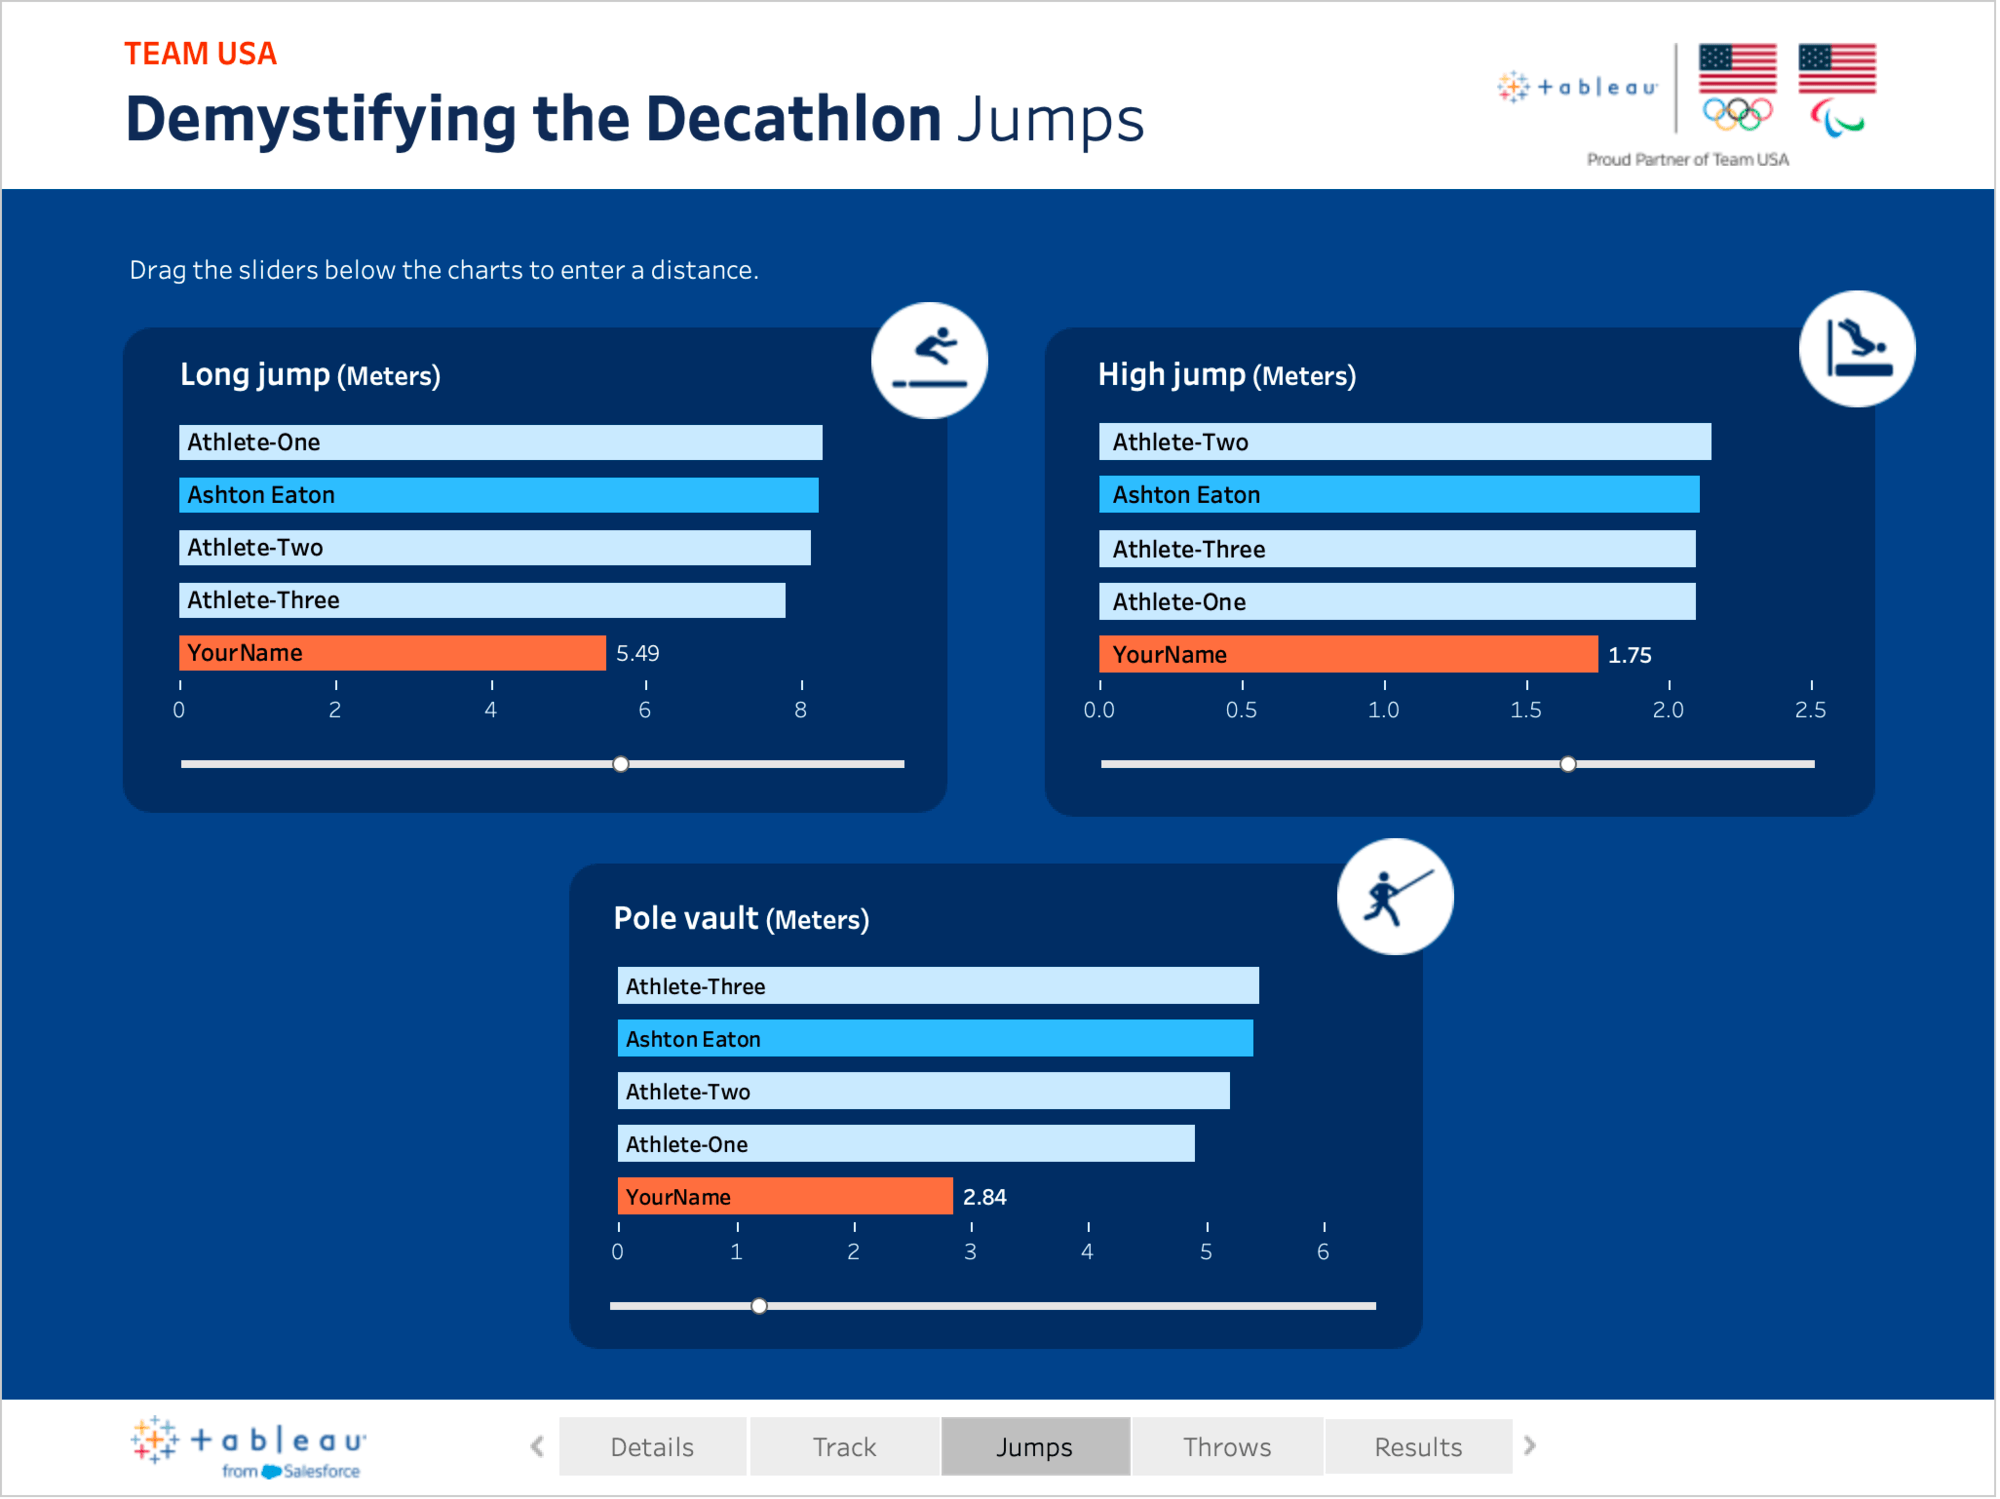  Tableau dashboard of how the scoring of decathlon works across top athletes, and allows a user to compare their performance to those athletes.